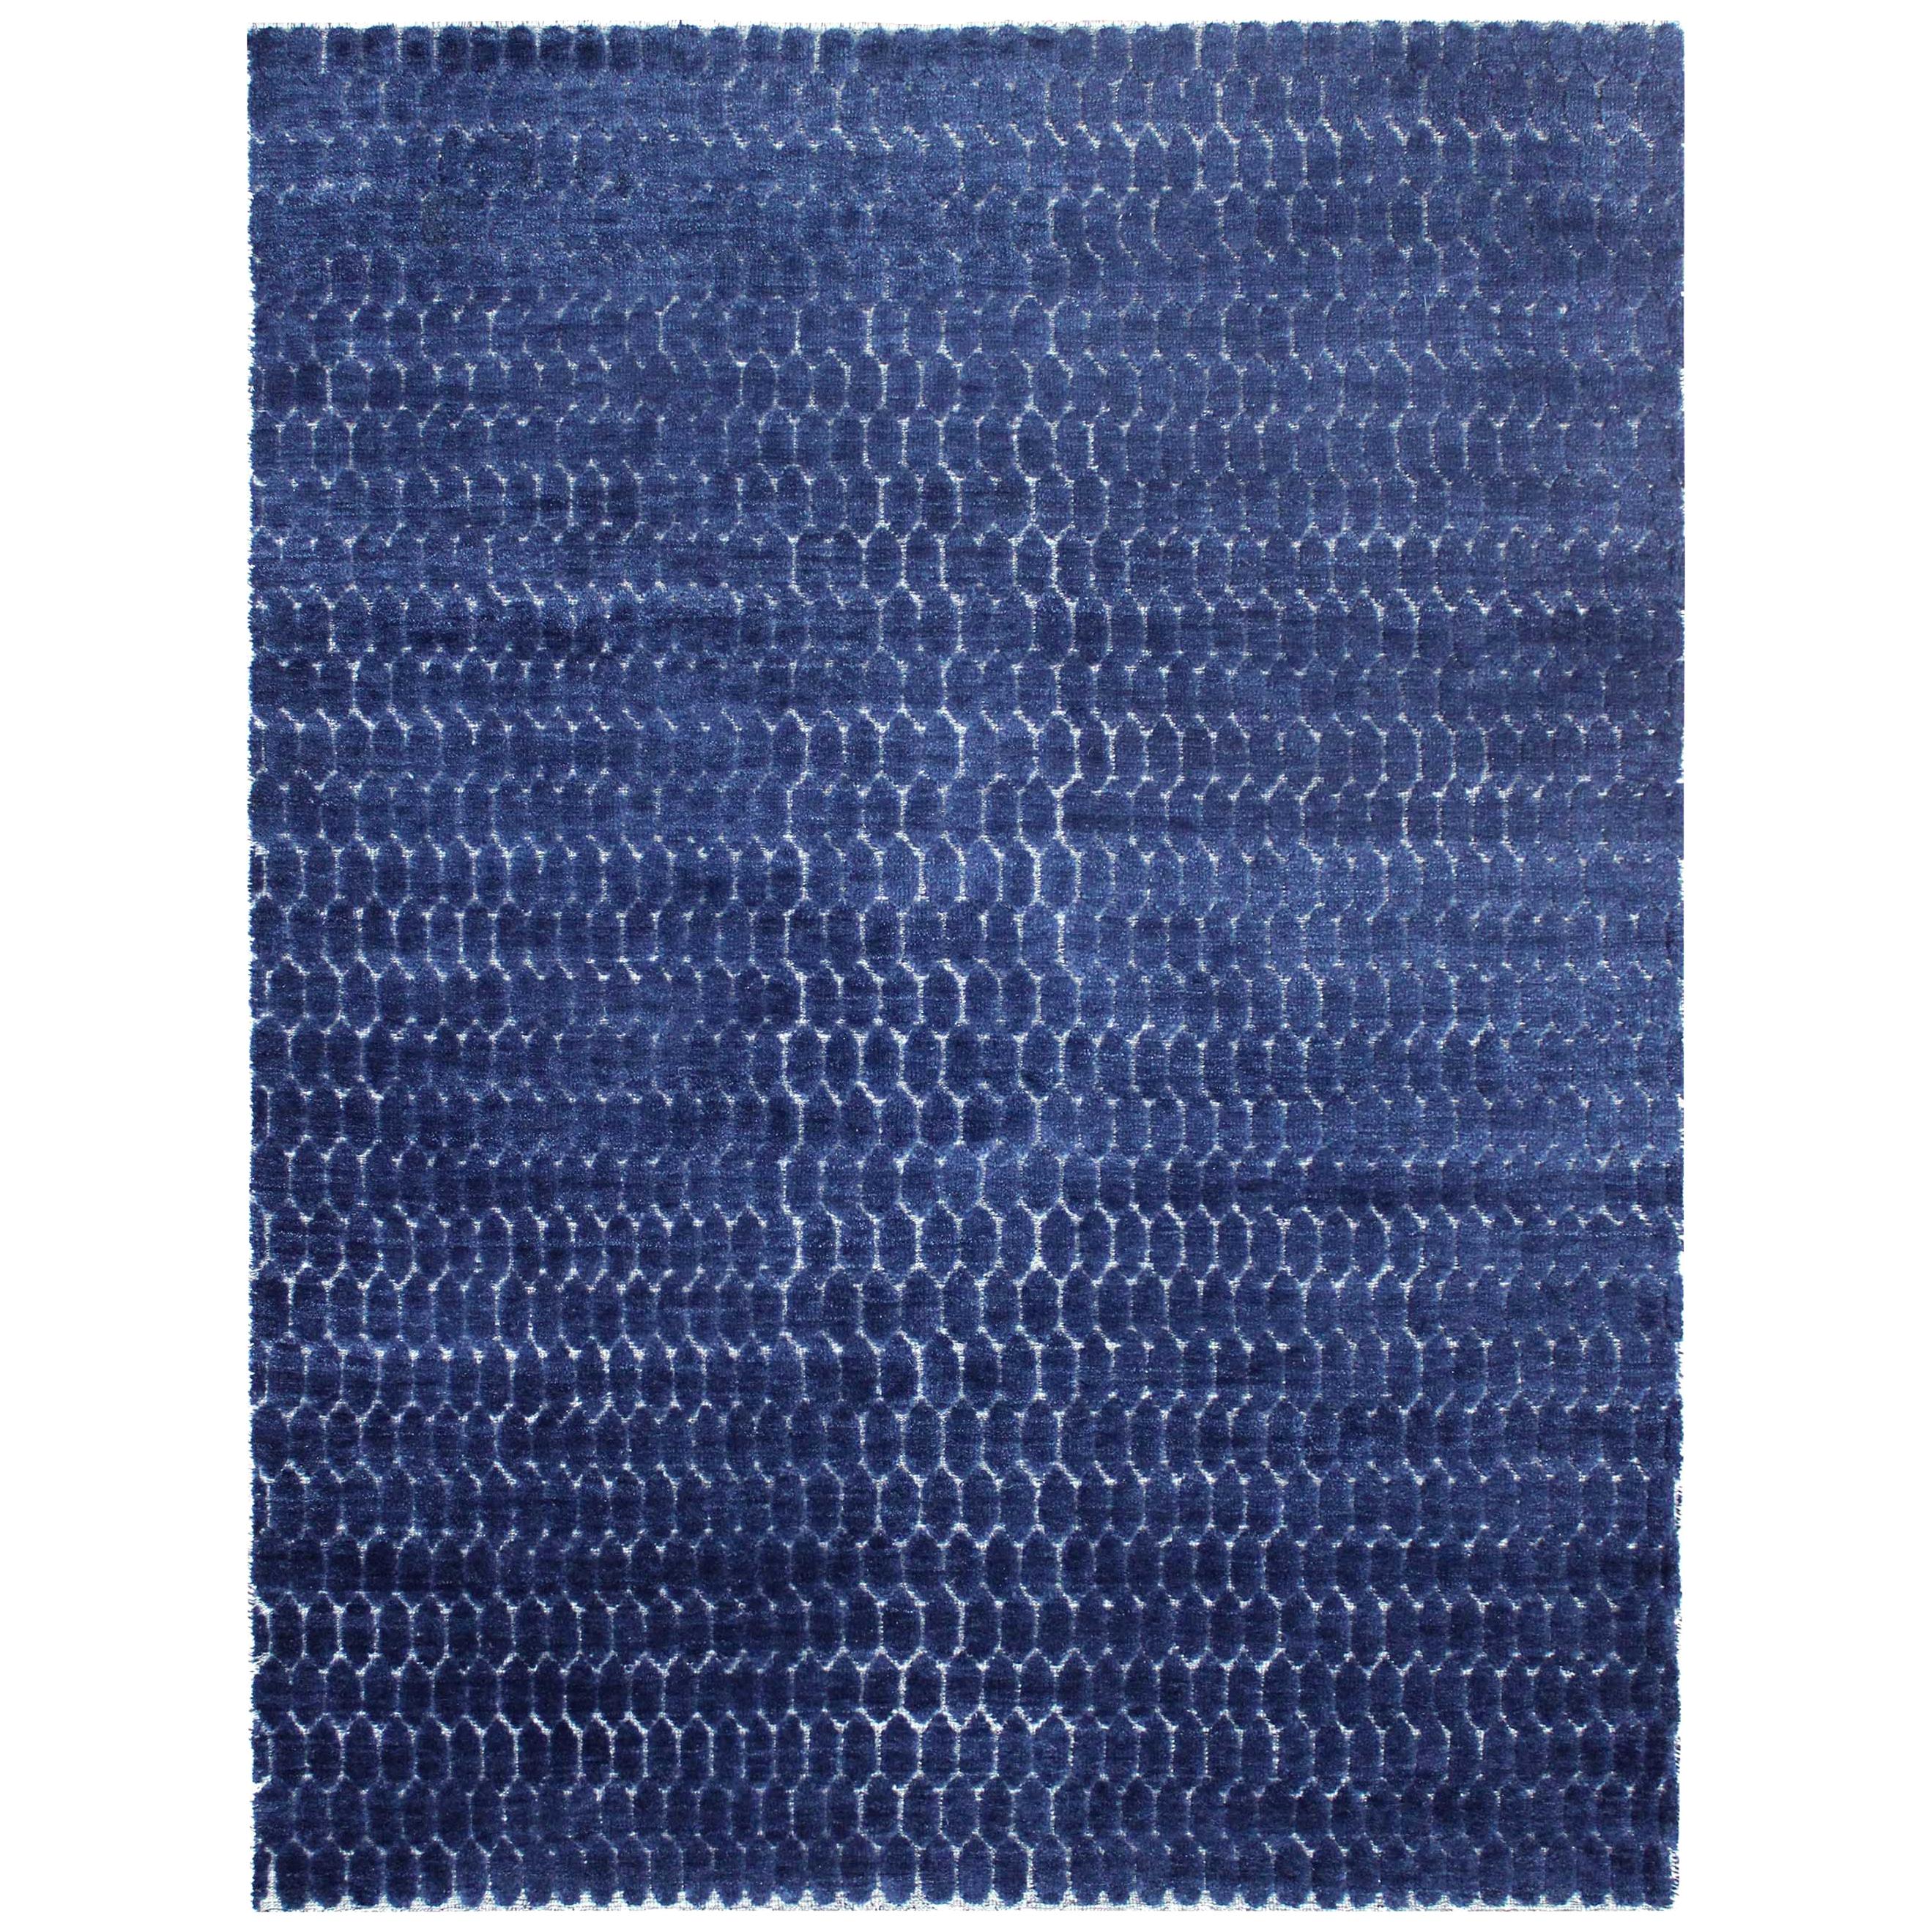 New Cameron Collection Area Rug with Modern Design Patterns and Colors